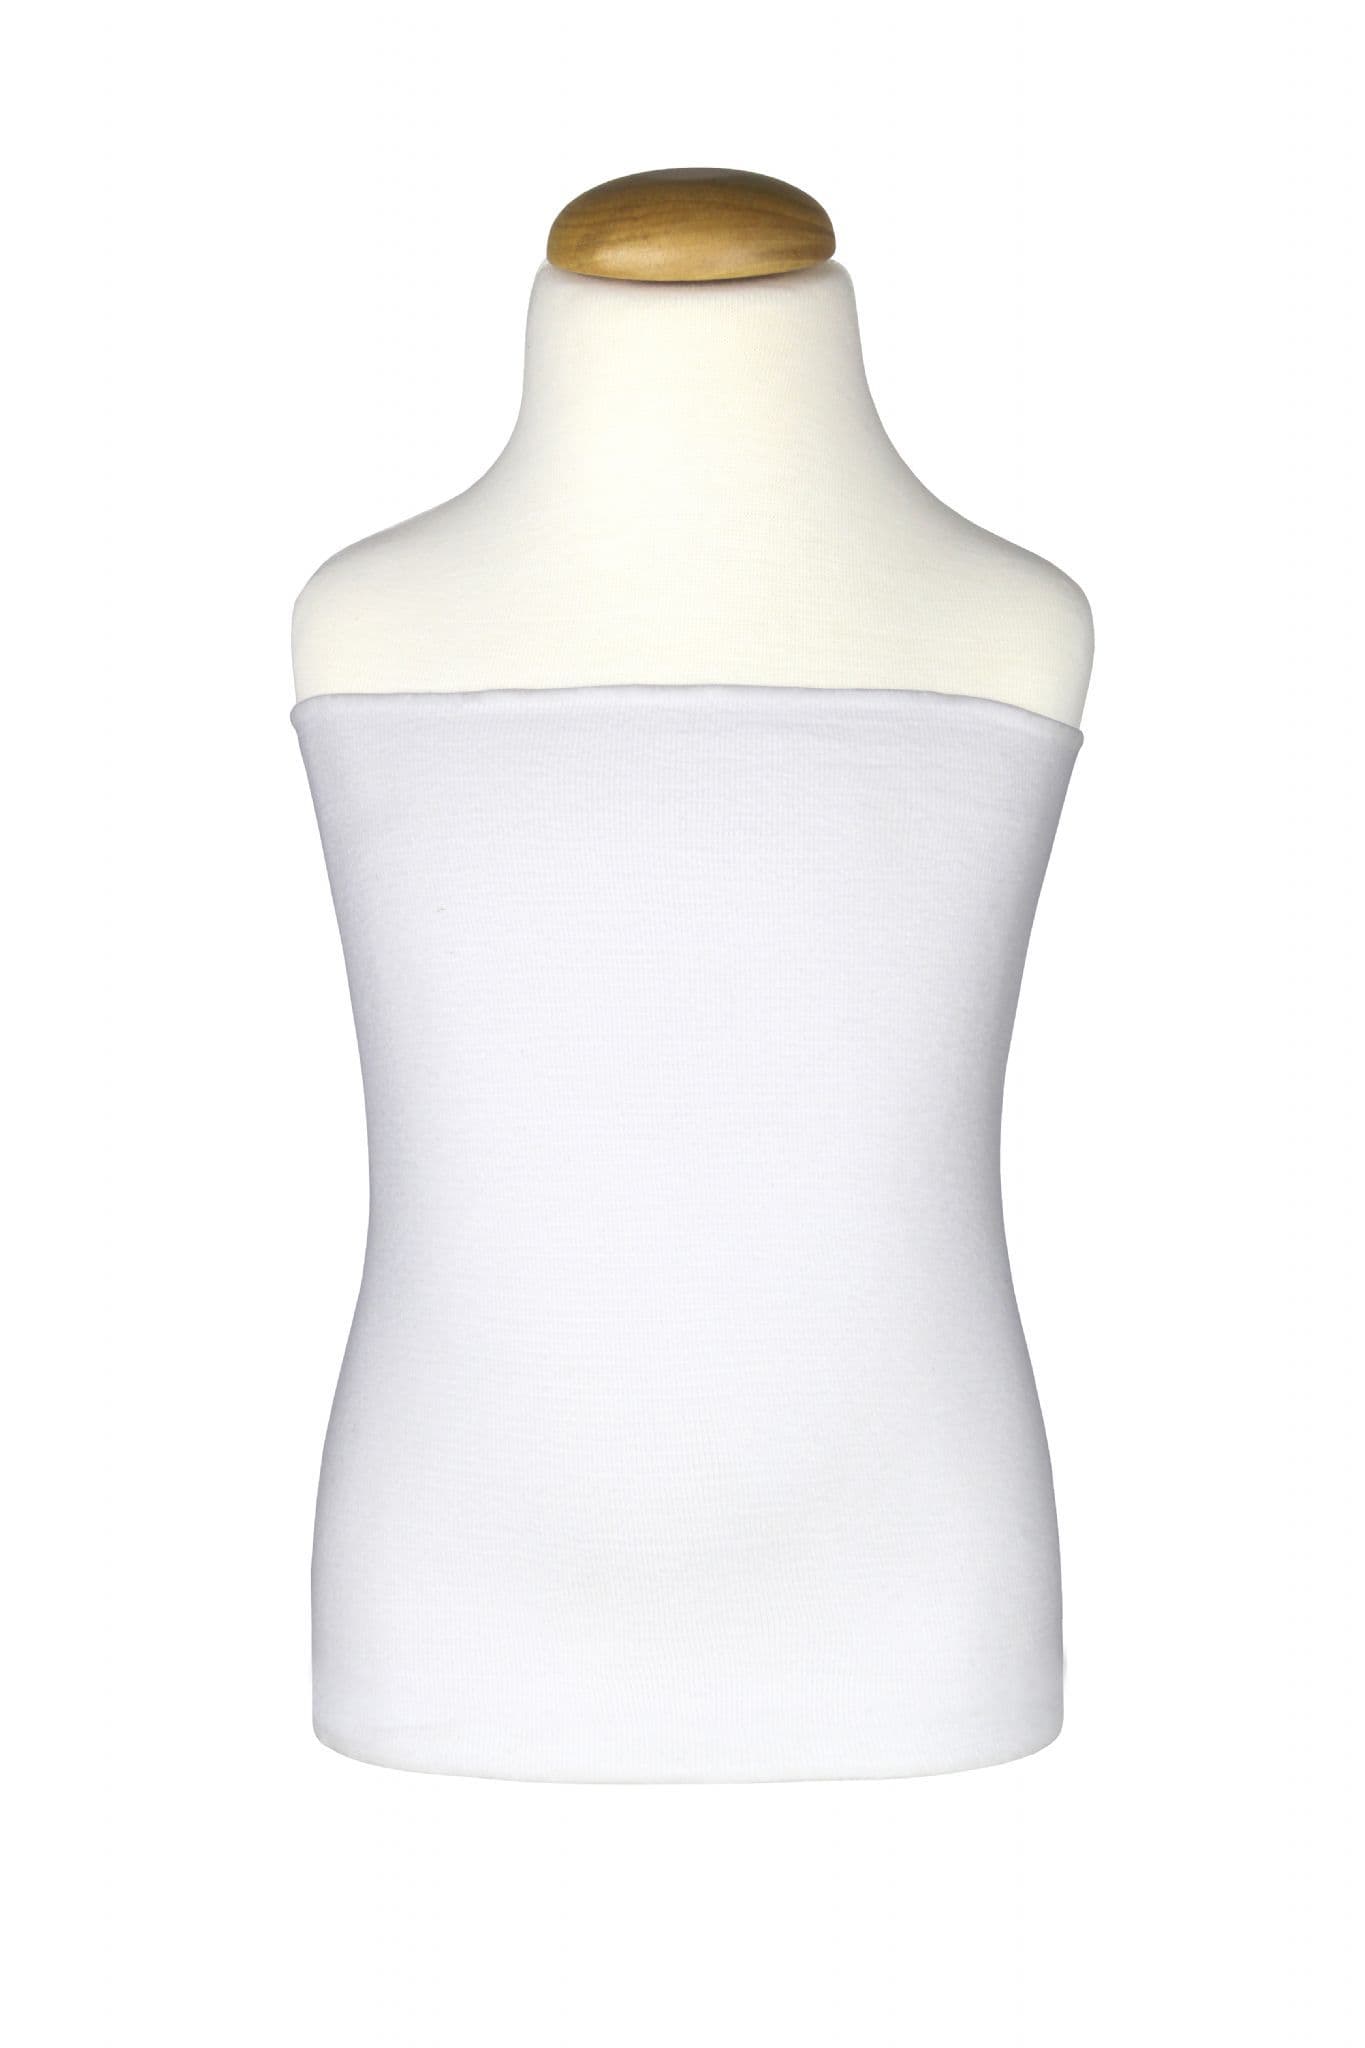 Seamless Unisex Strapless Torso Tube for Brace - White without straps- Protective Body Sock from